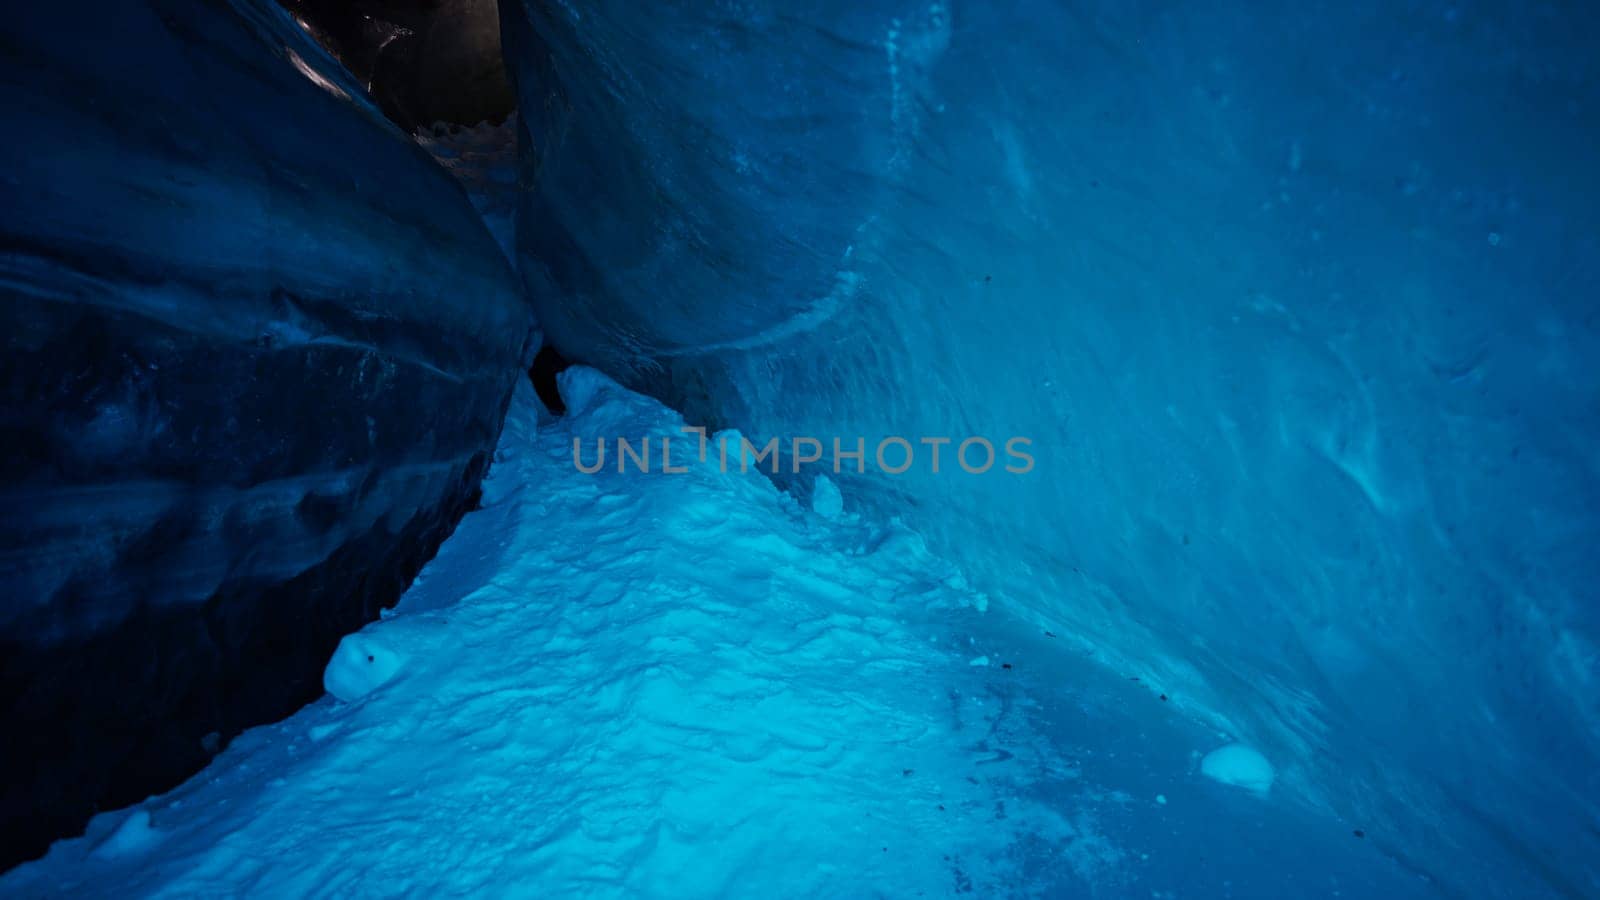 A huge corridor inside an ice cave in mountains by Passcal